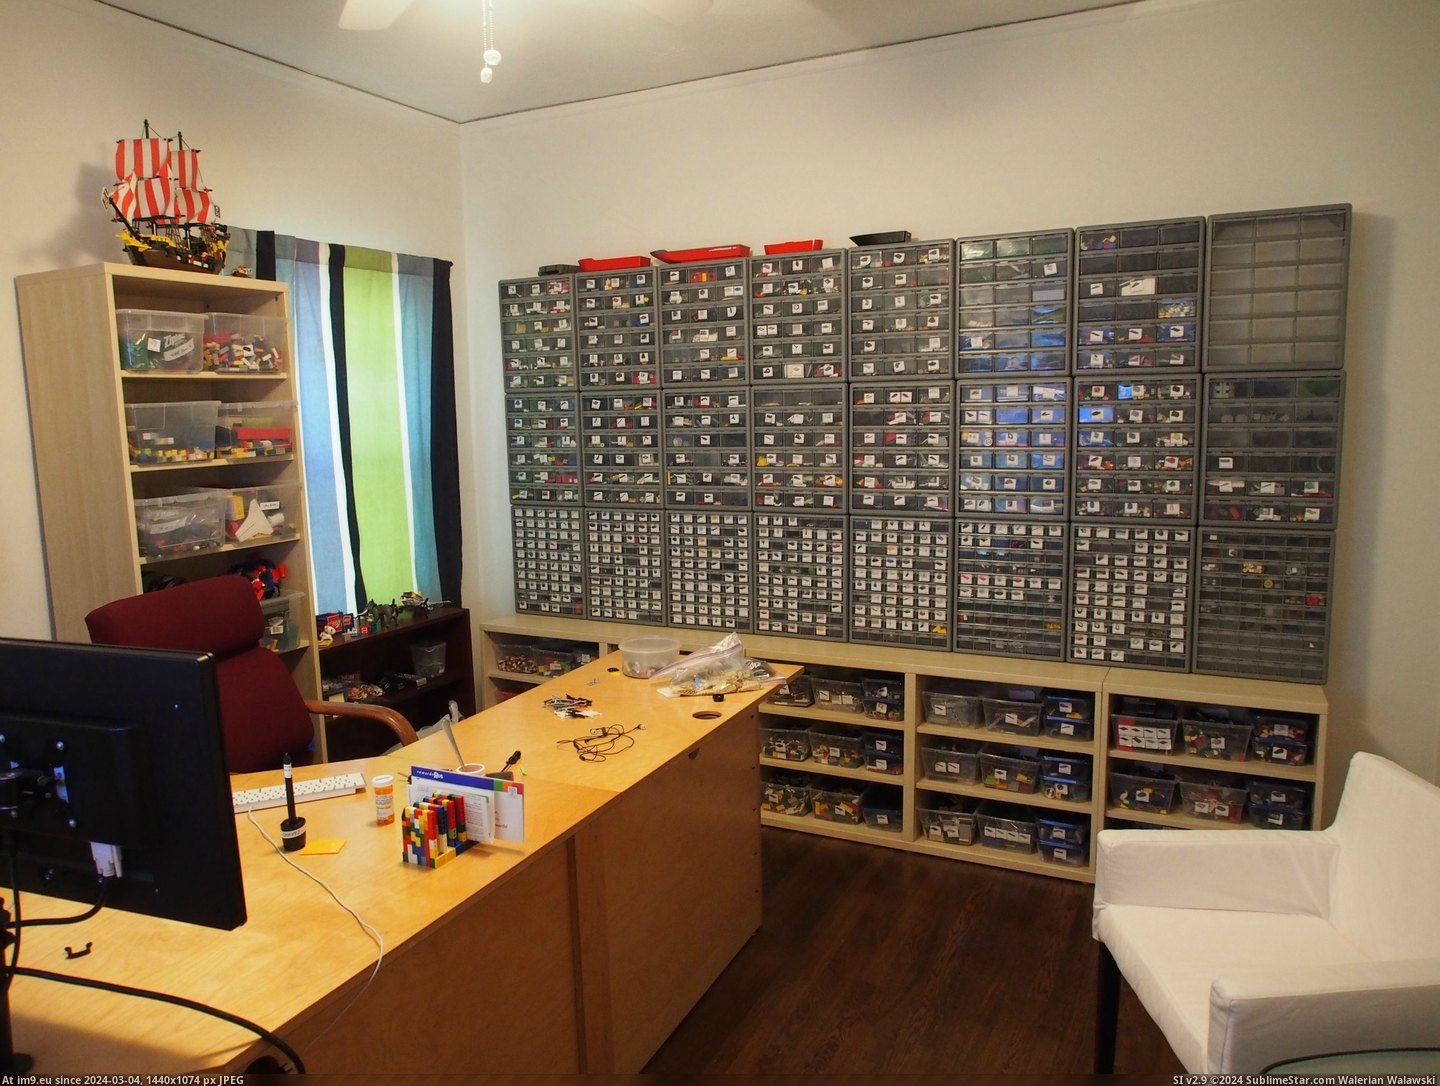 #Room #Lego #Finished #Finally [Pics] My Lego room is finally finished! 3 Pic. (Bild von album My r/PICS favs))